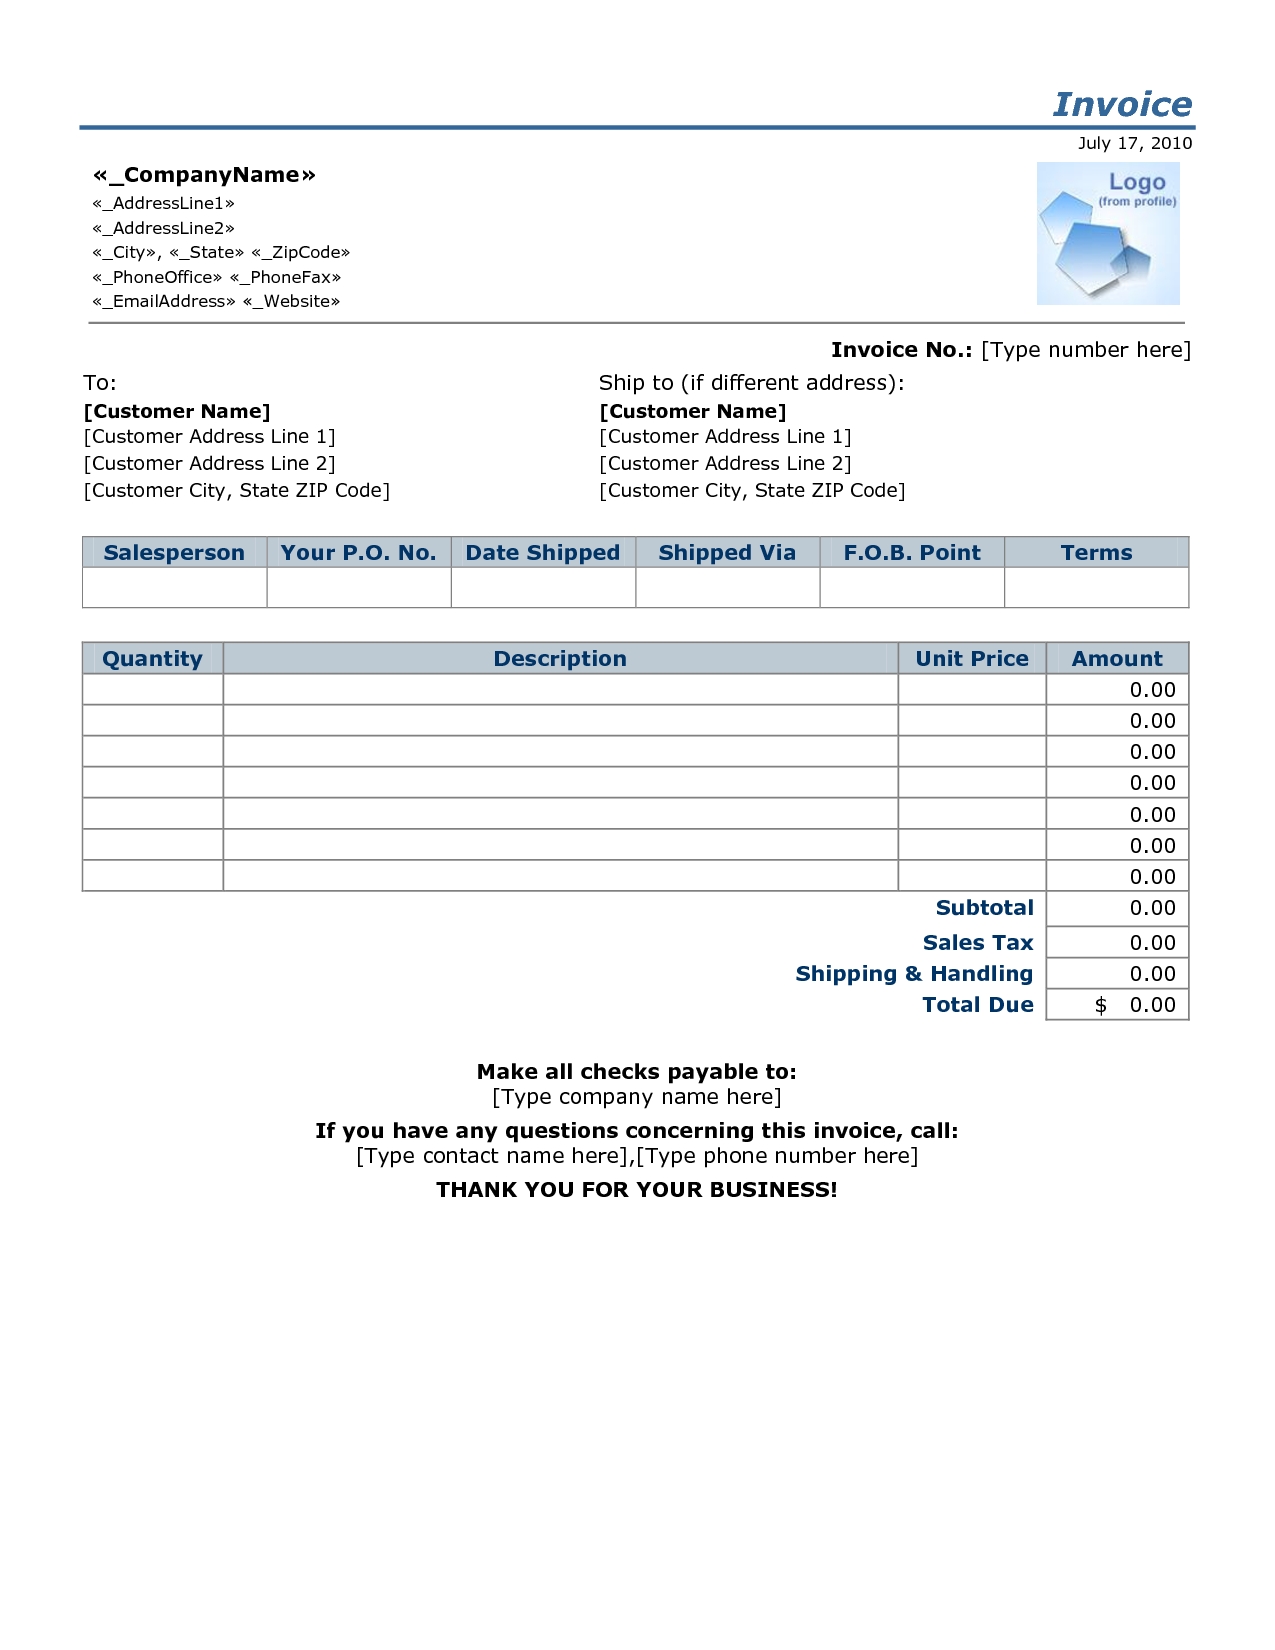 Invoice For Small Business * Invoice Template Ideas